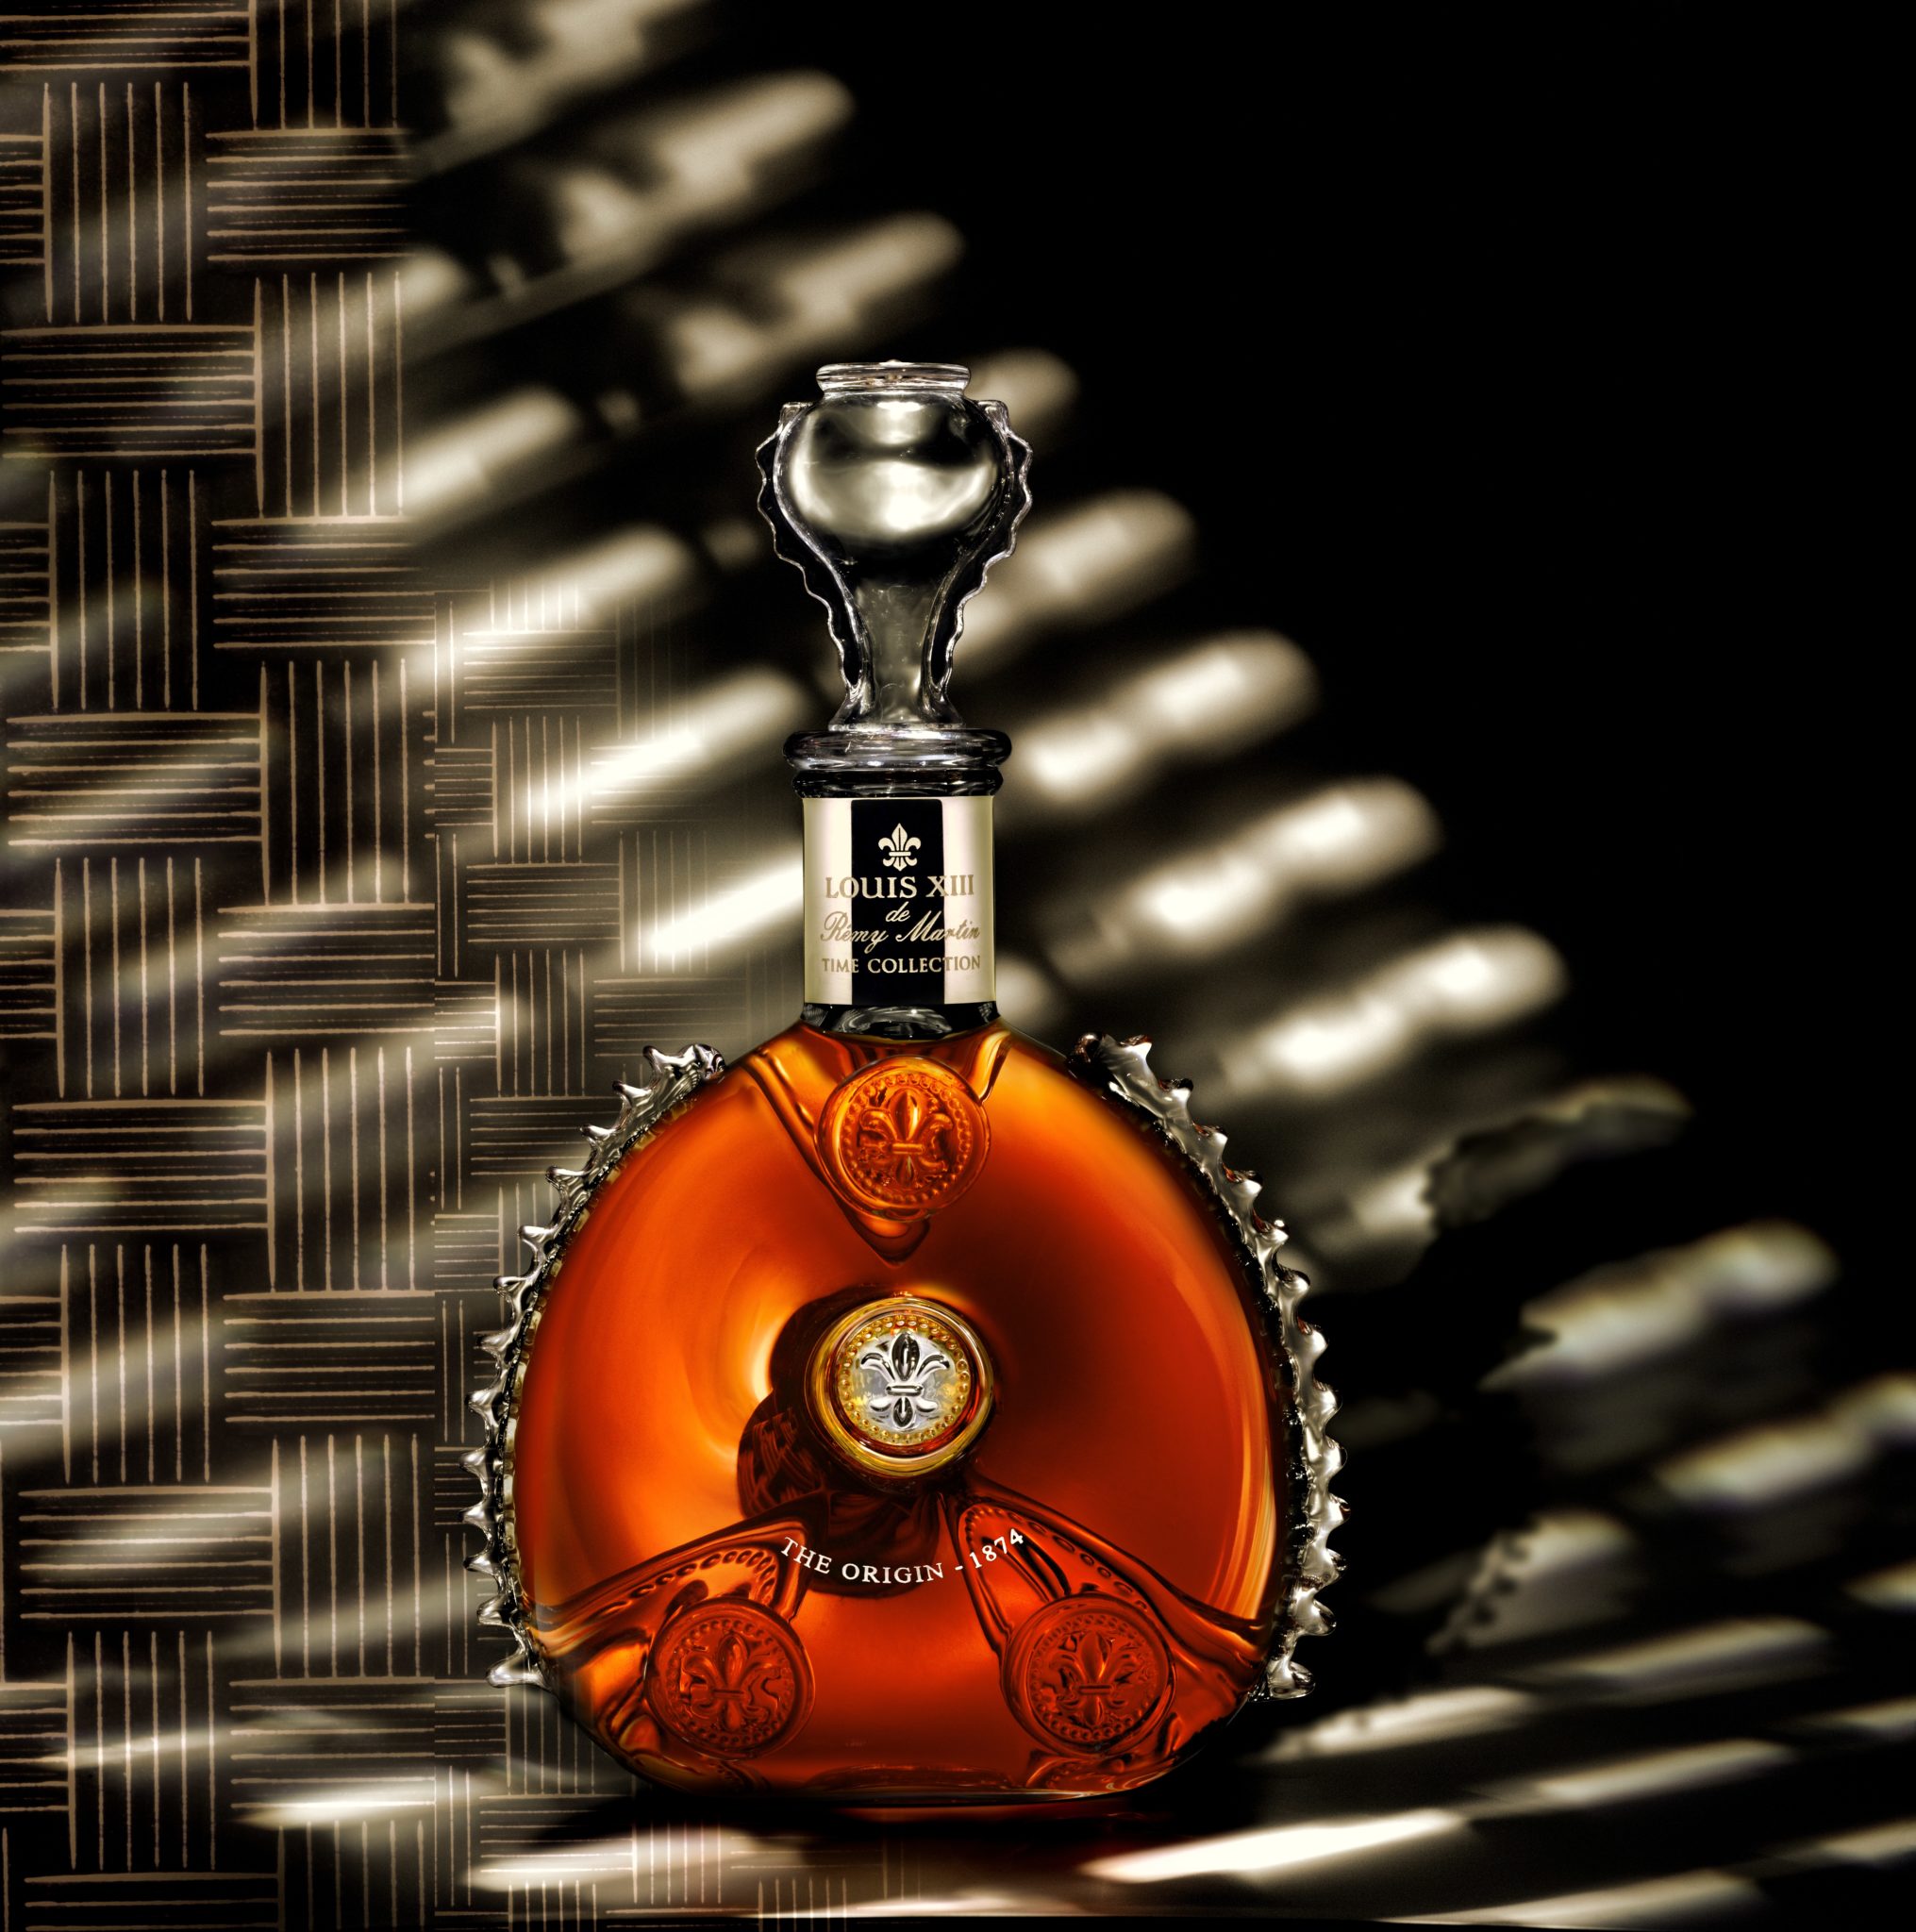 The Origin – 1874 Highlighting a Special Chapter in LOUIS XIII History